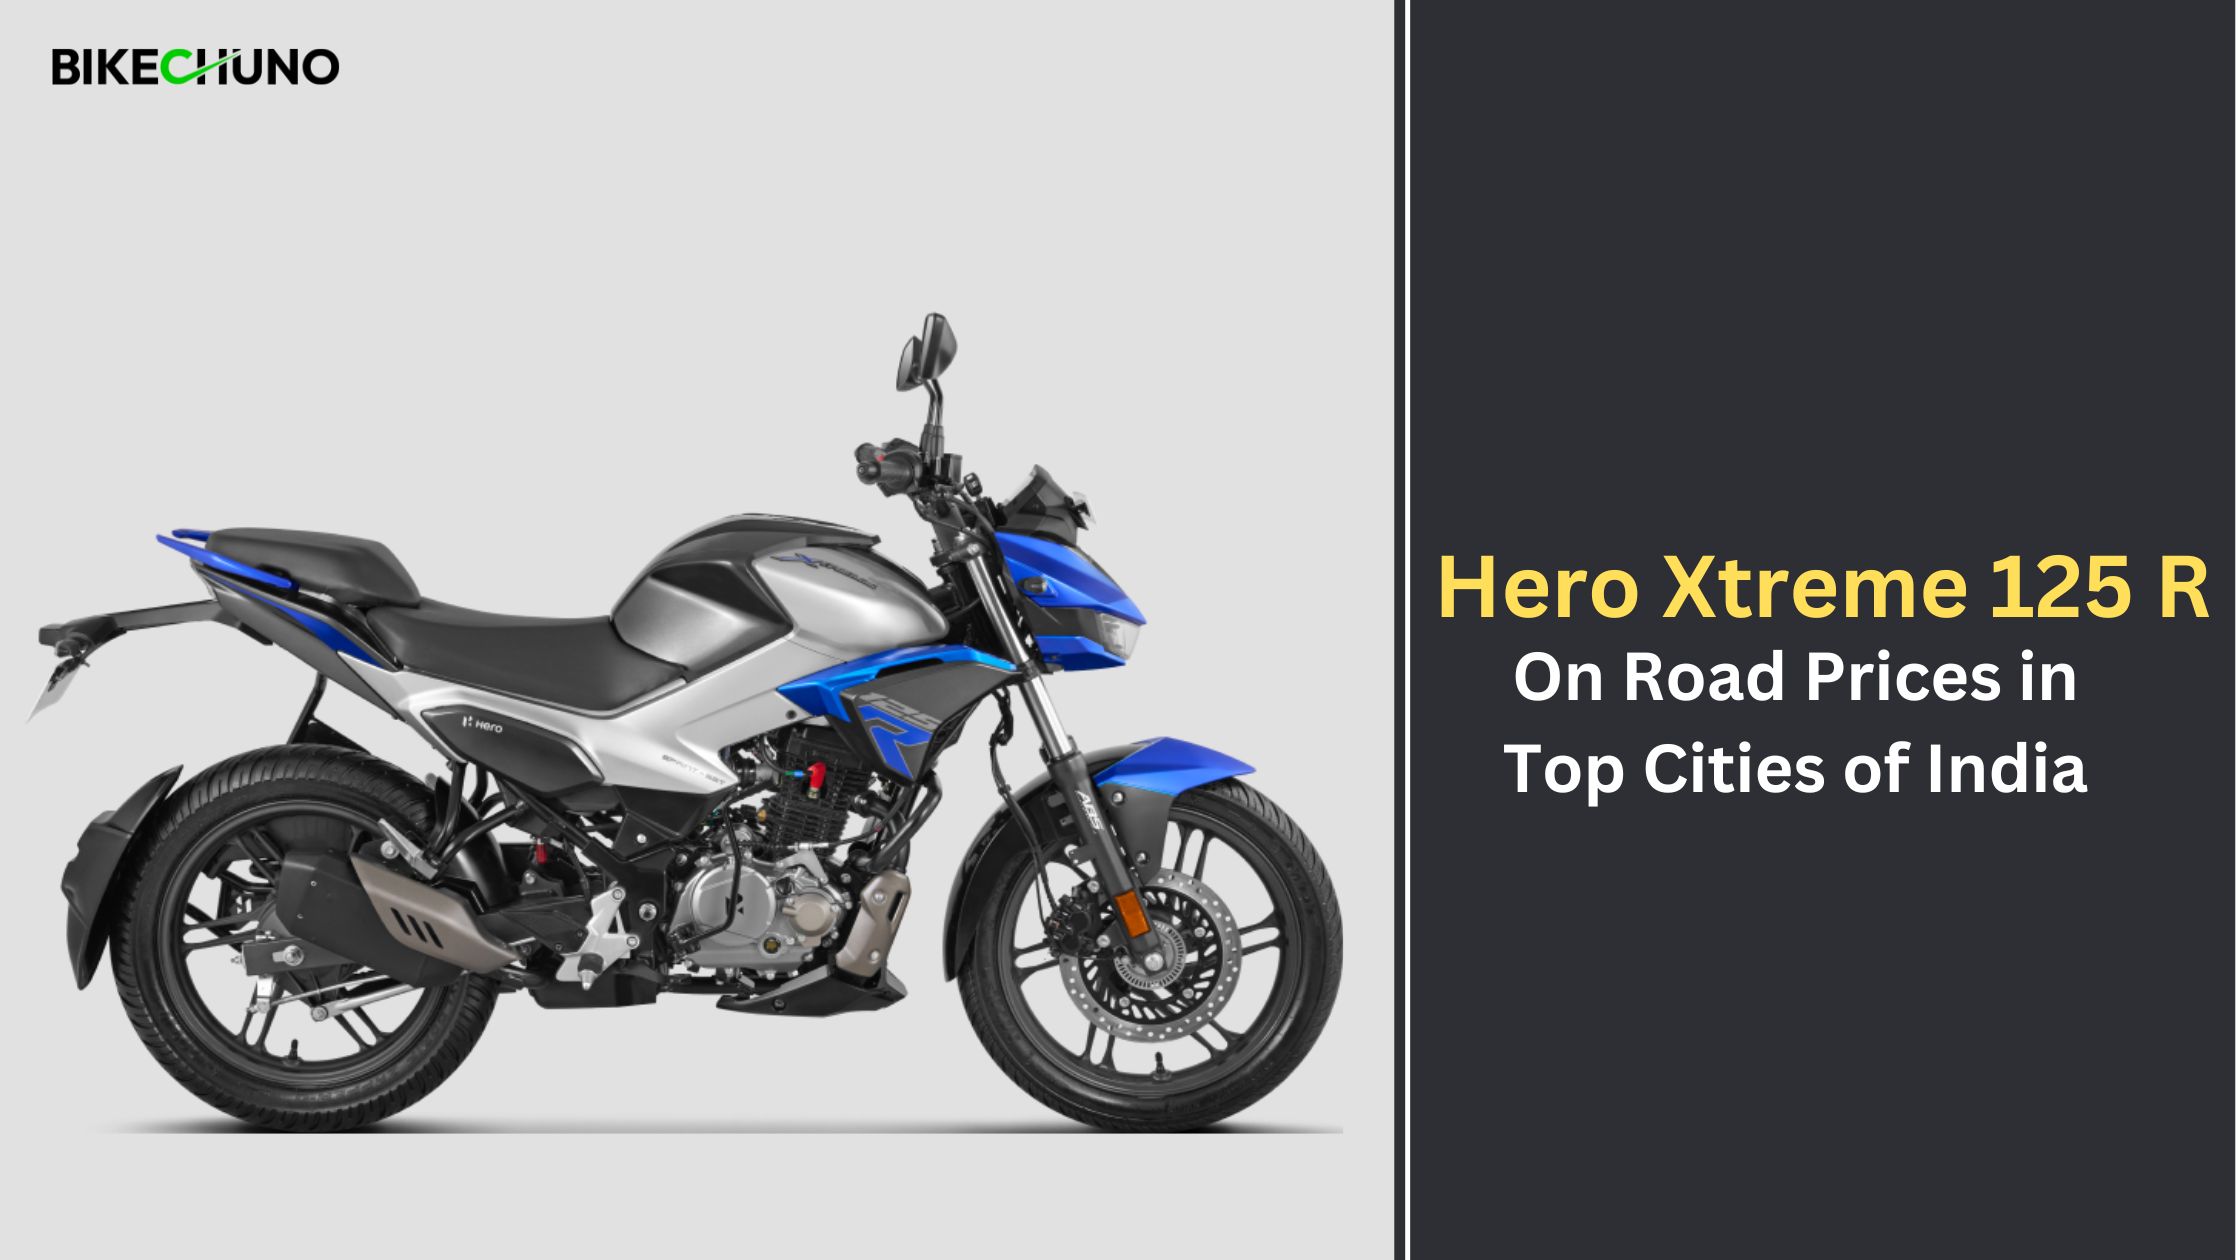 Hero Xtreme 125 R on Road Prices in Top Cities of India